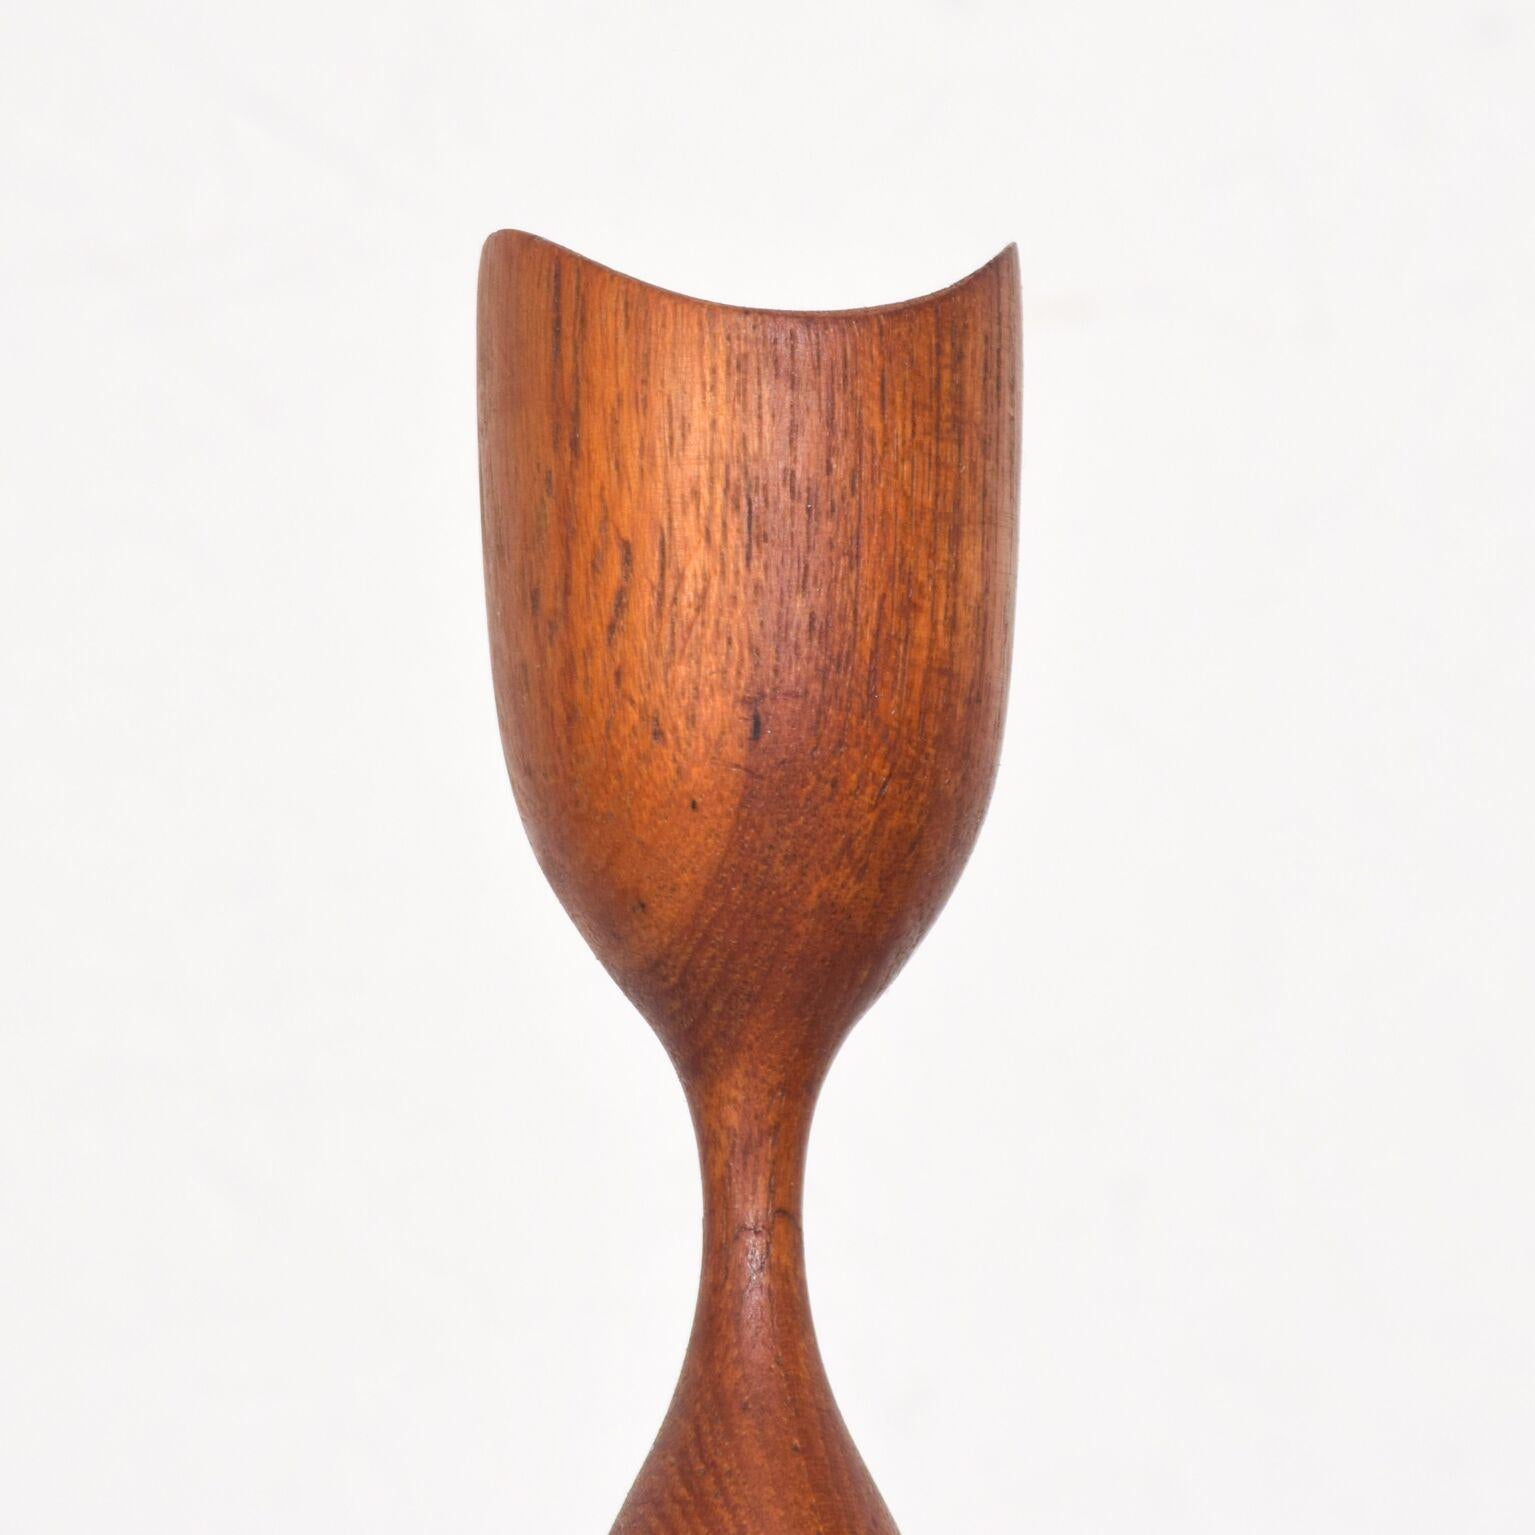 For your consideration: Danish modern sculptural teak tulip wood sculpture is from Denmark. Danish Modern in shape of a tulip. No placement for candle. This is a sculpture. Dimensions: 12